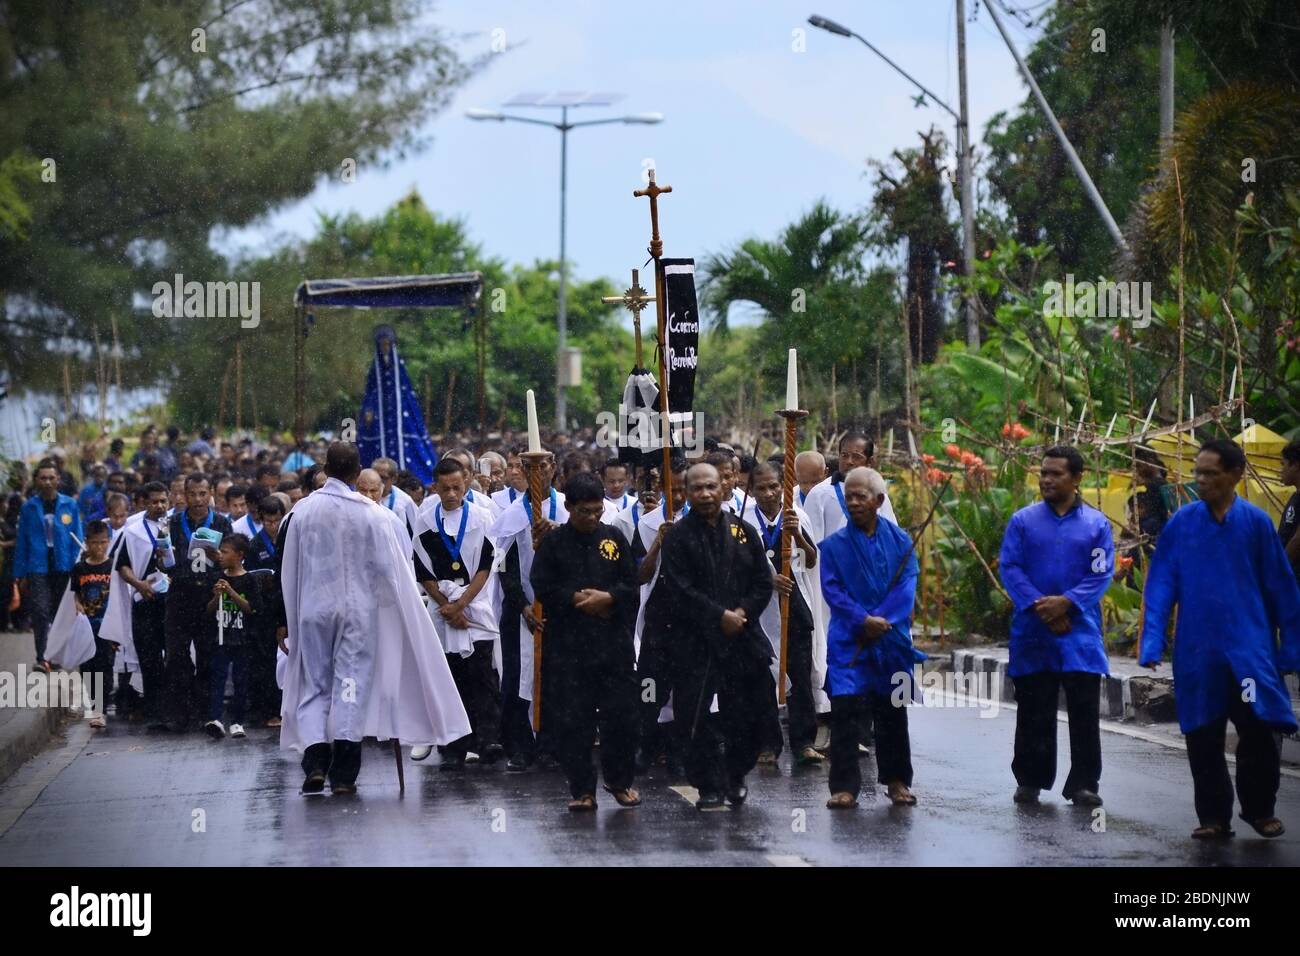 Chapel elders lead congregation to bring Tuan Ma (Mother Mary) statue to Larantuka Cathedral during Holy Week procession on Good Friday in Indonesia. Stock Photo